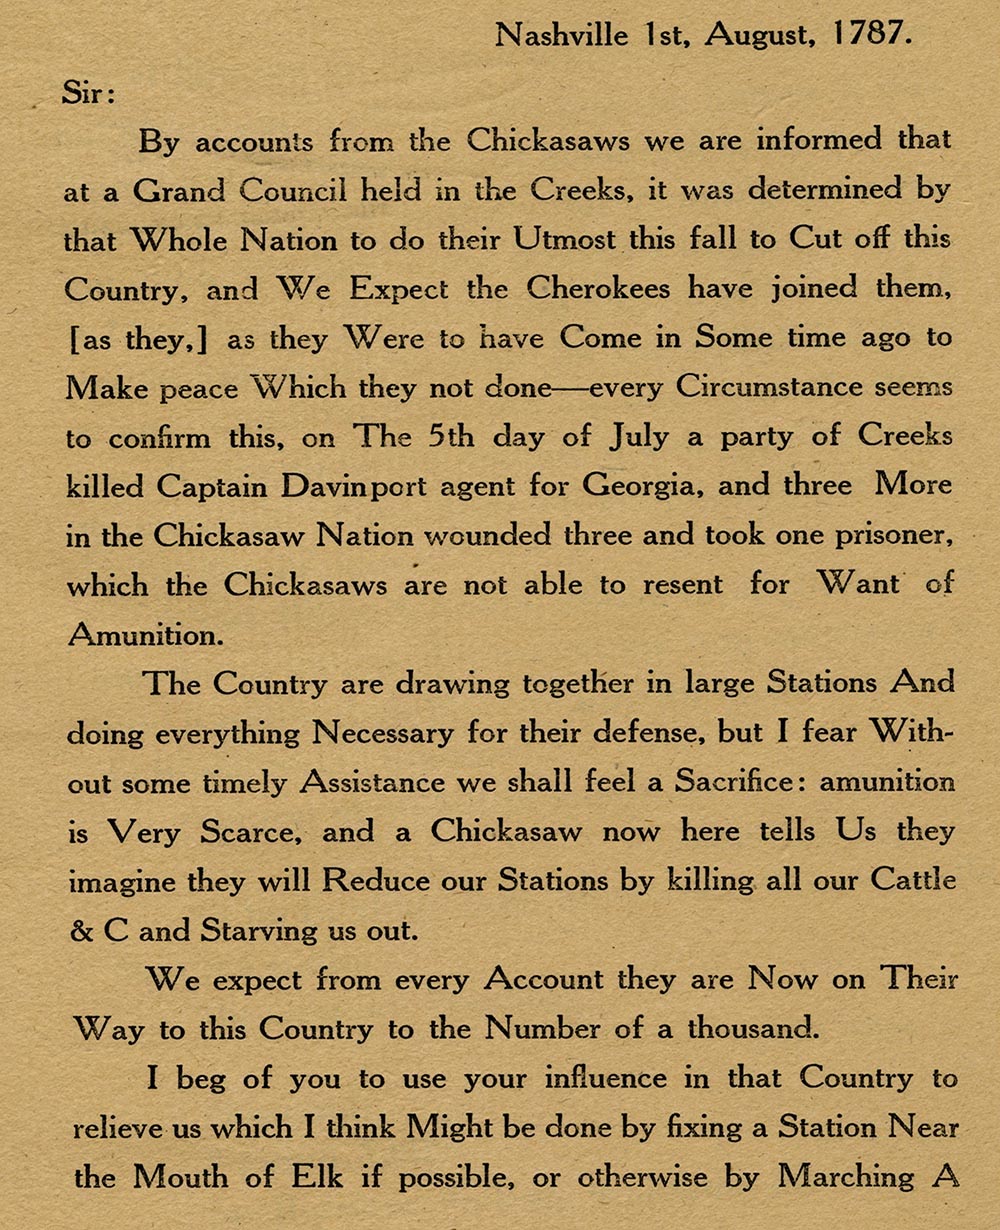 James Robertson letter to Governor John Sevier of State of Franklin